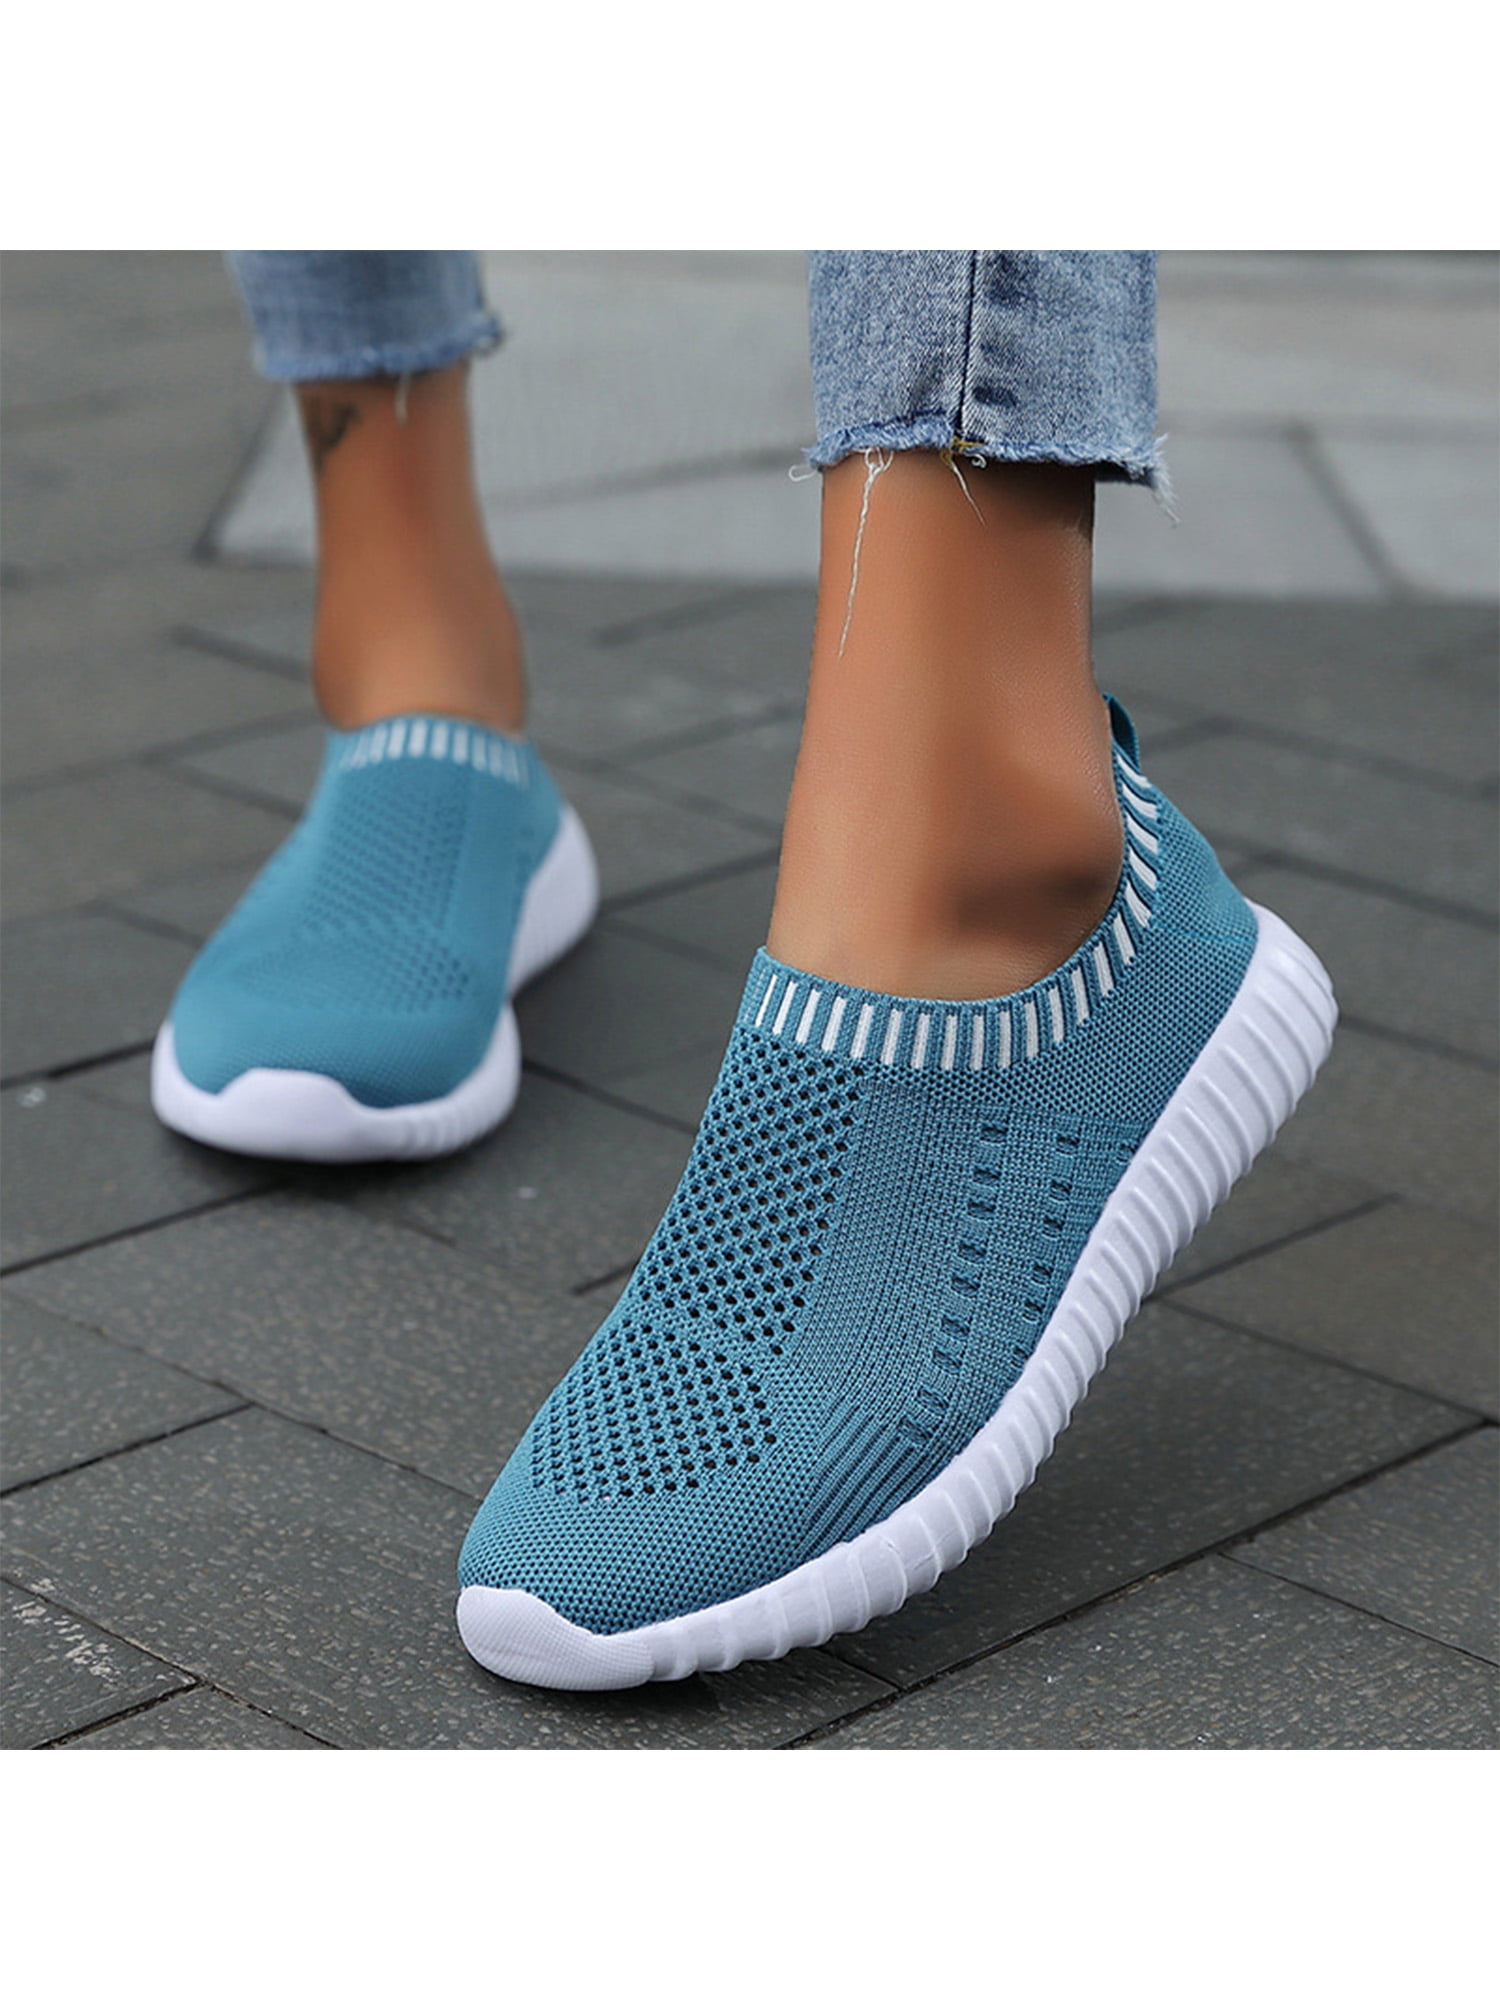 Breathable Women's Sports Shoes Mesh Casual Shoes Socks Shoes Non-Slip Soft Sole 